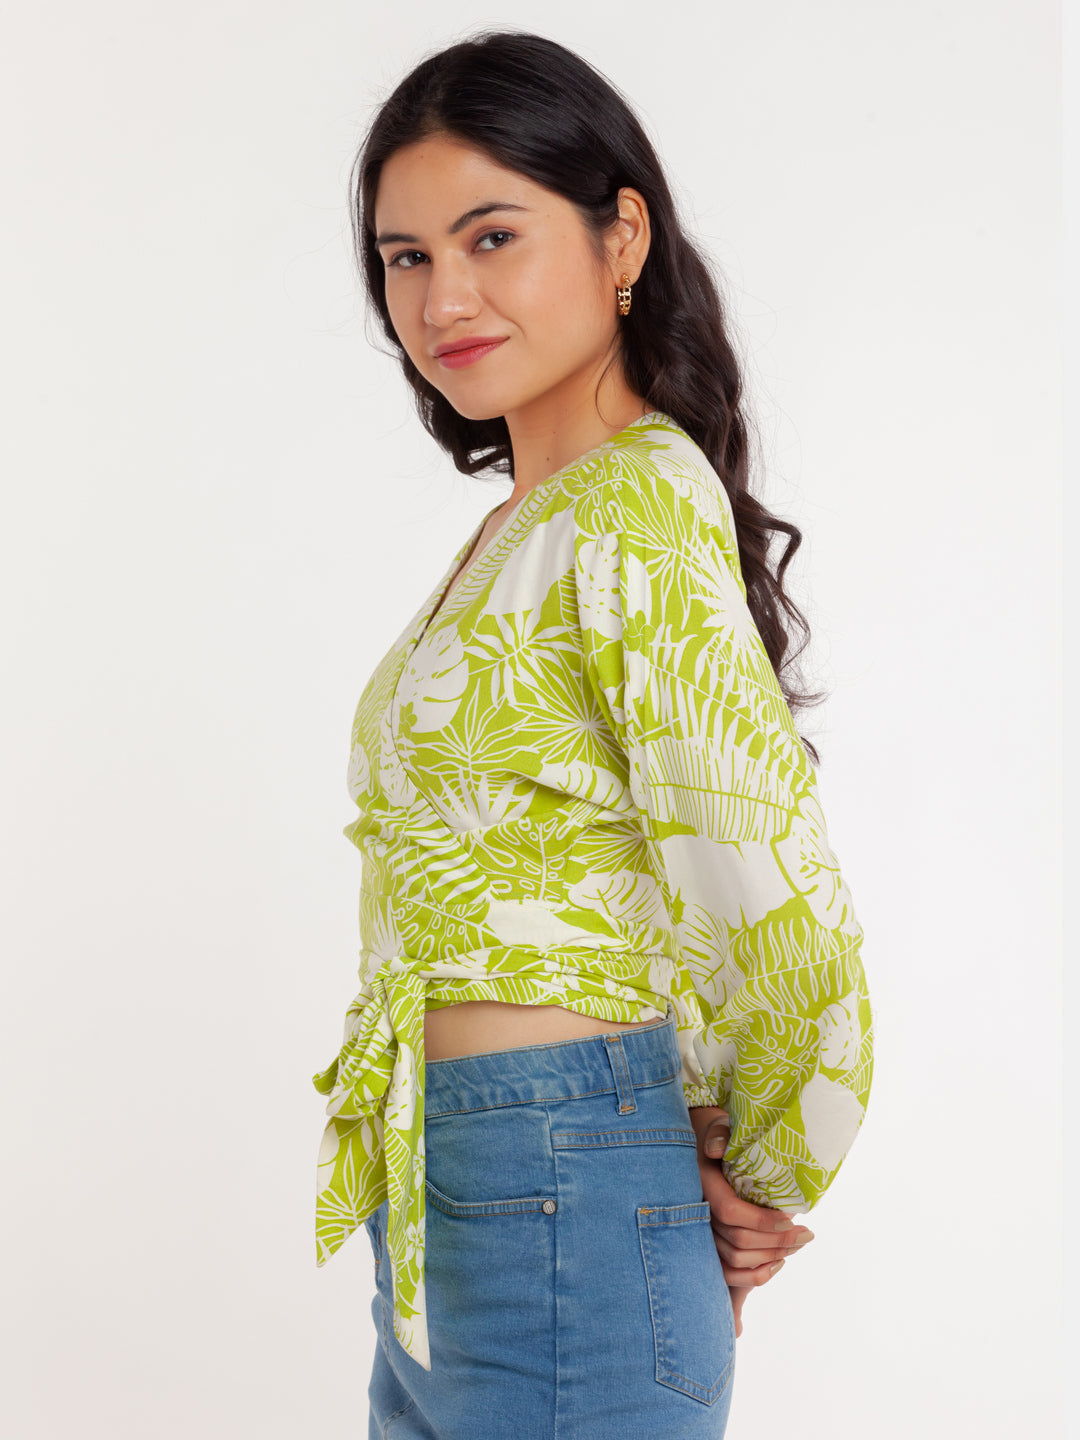 Green Printed Top For Women